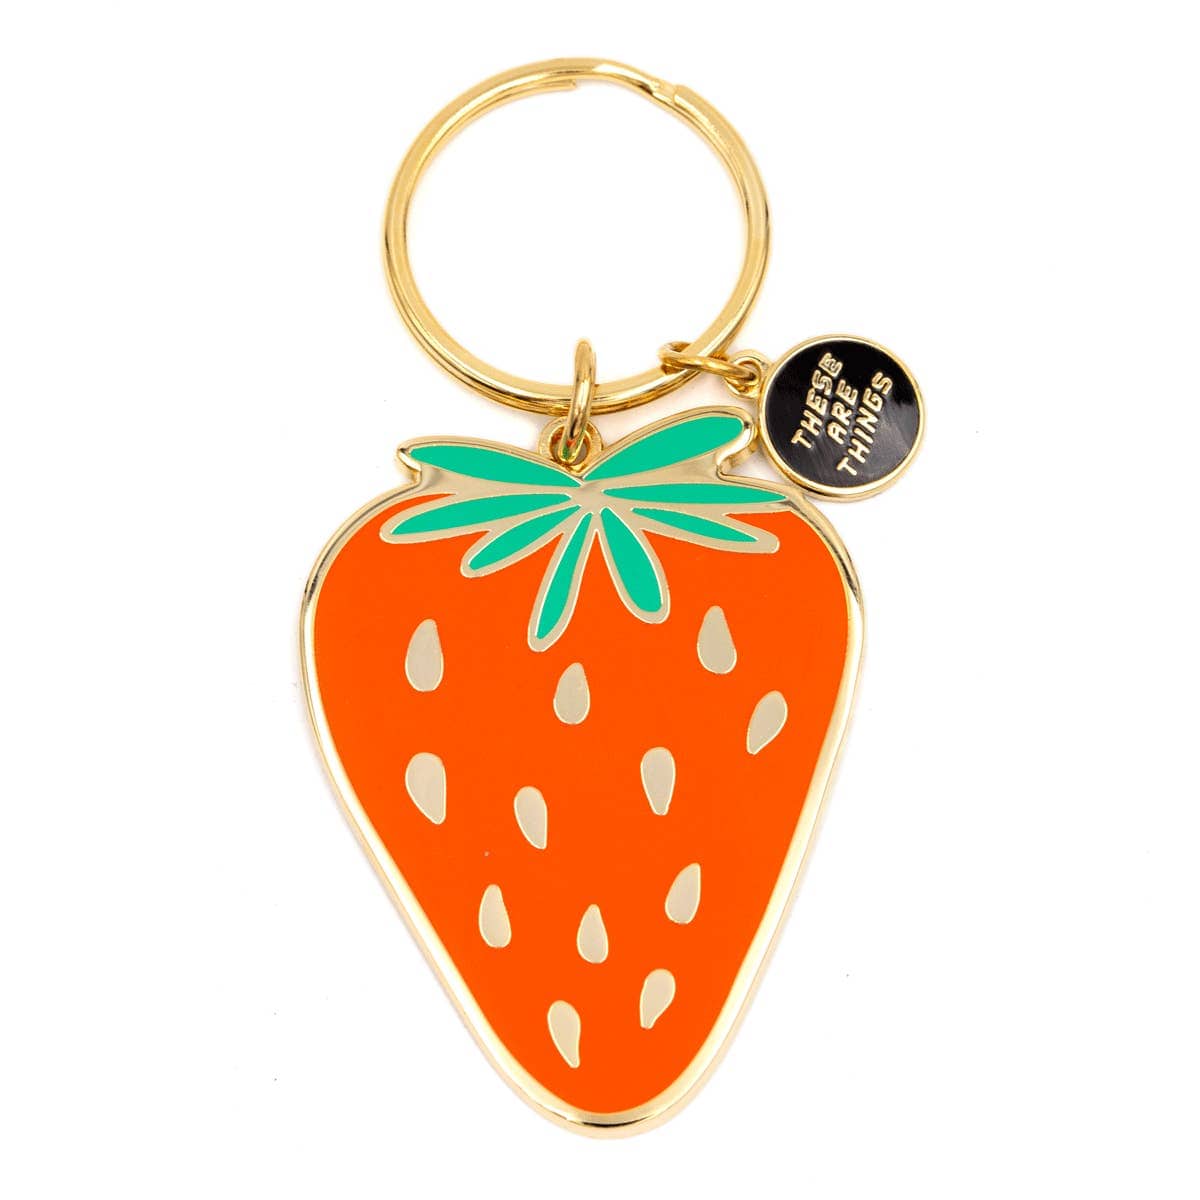 These are Things Strawberry Enamel Keychain